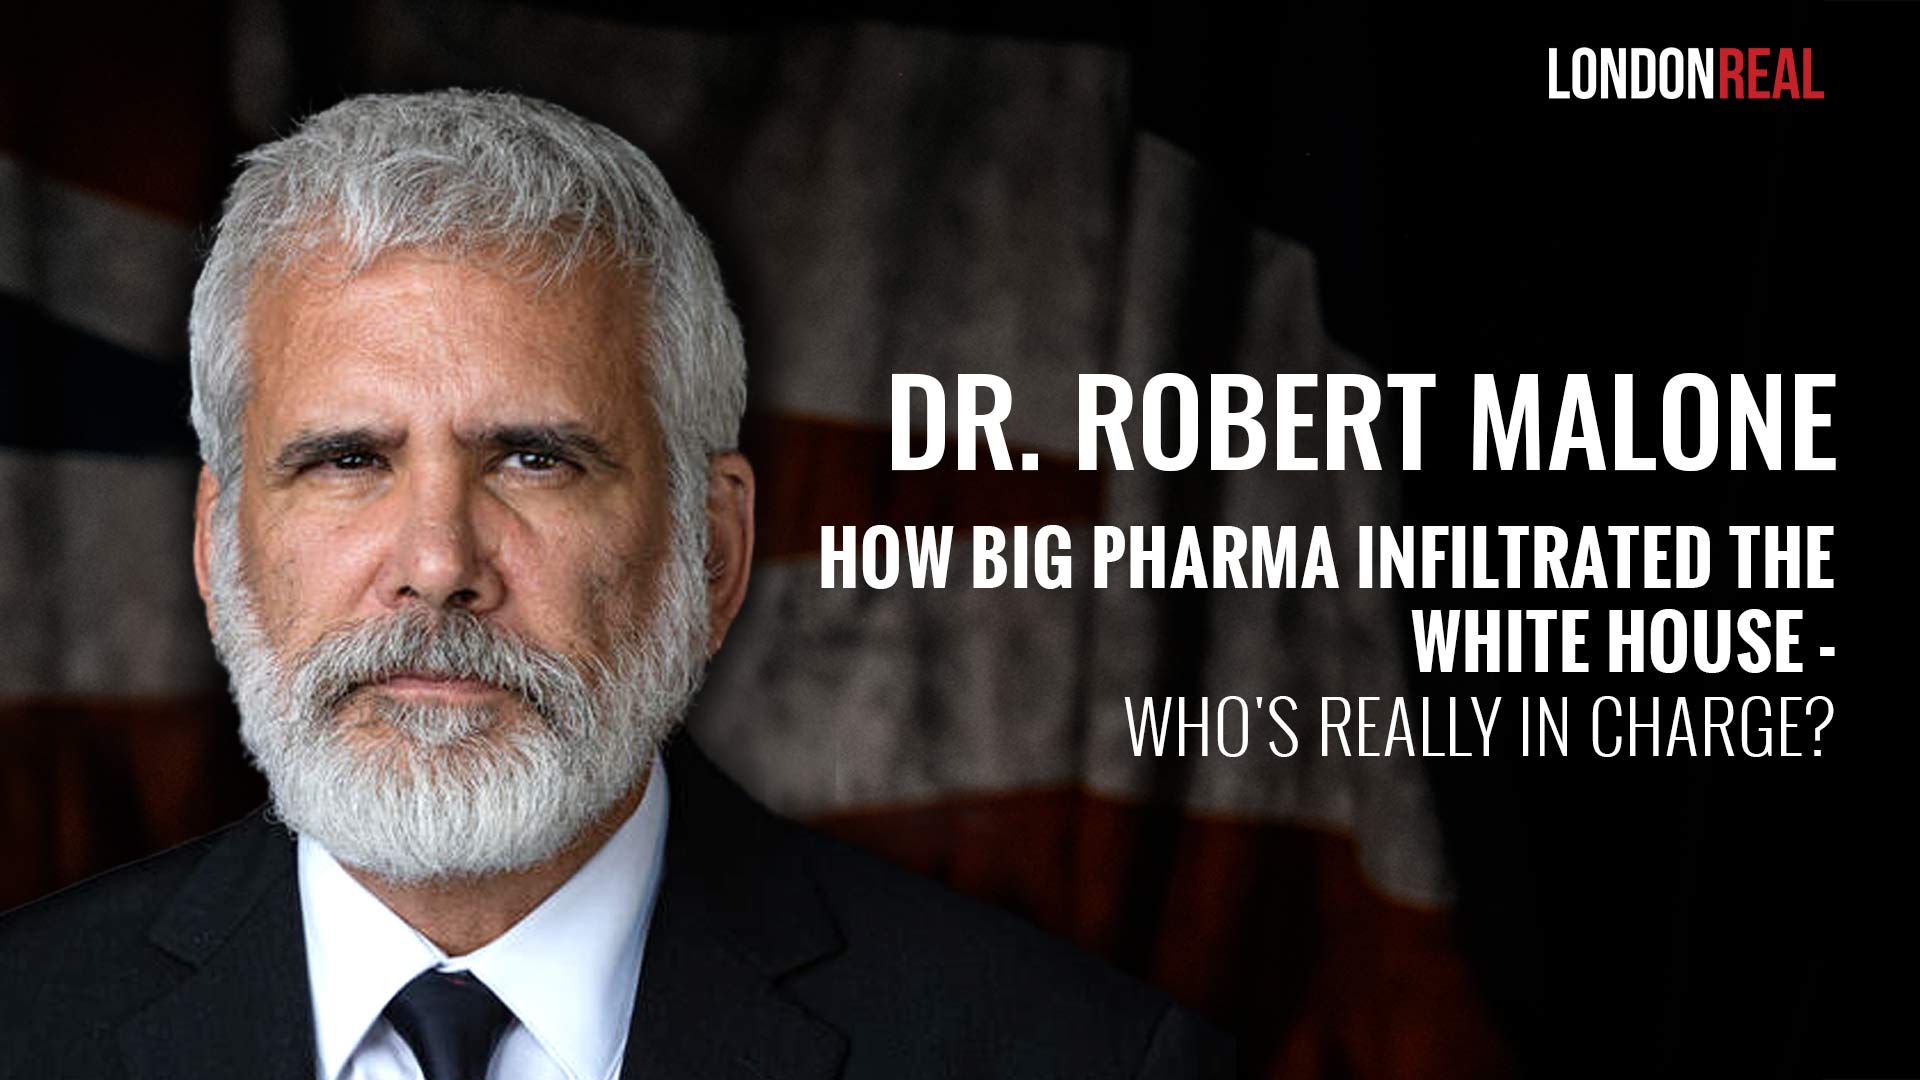 Dr Robert Malone - How Big Pharma Infiltrated the White House: Who's Really In Charge?